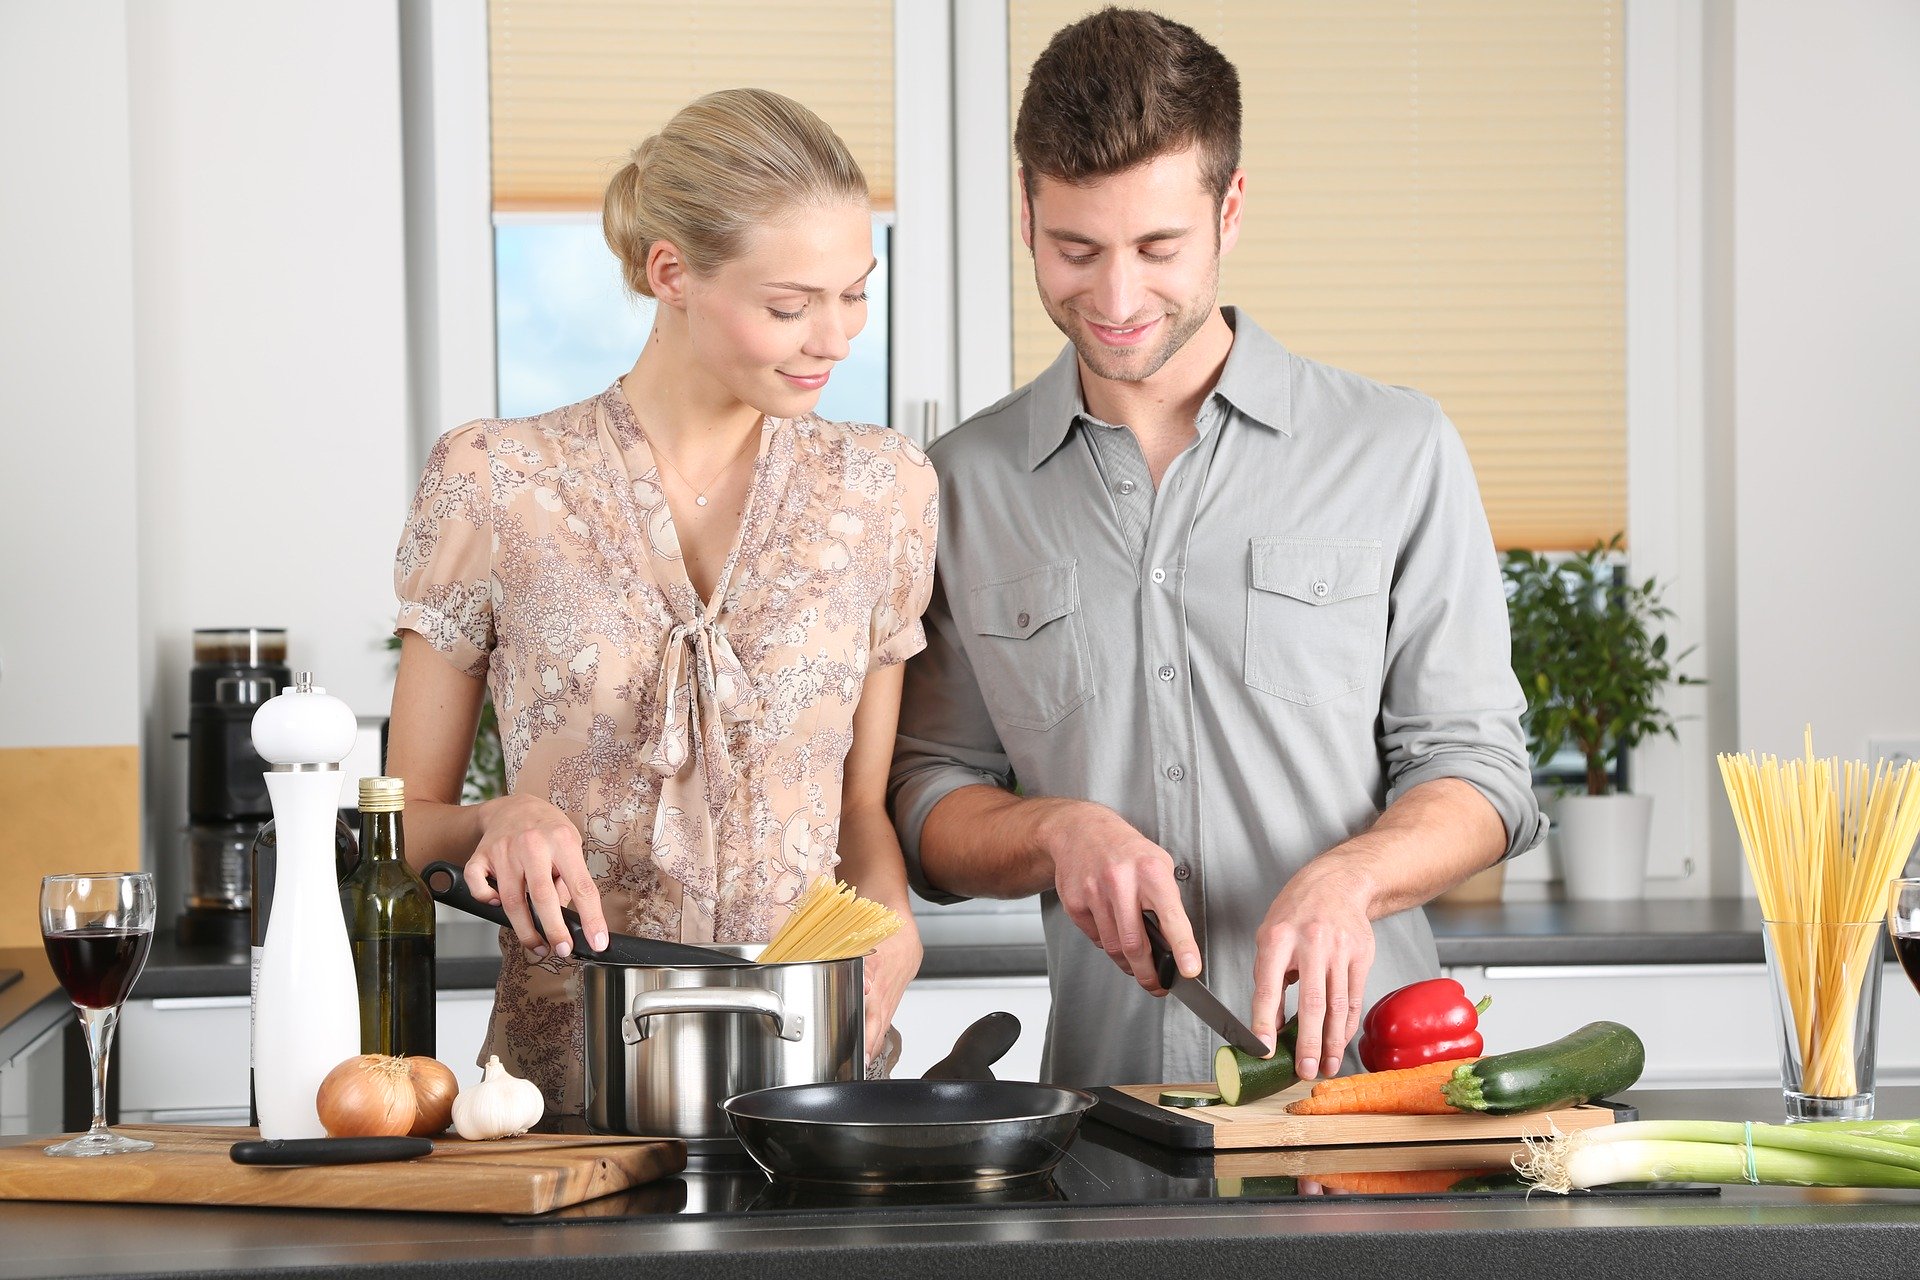 Woman & Man in Kitchen Cooking